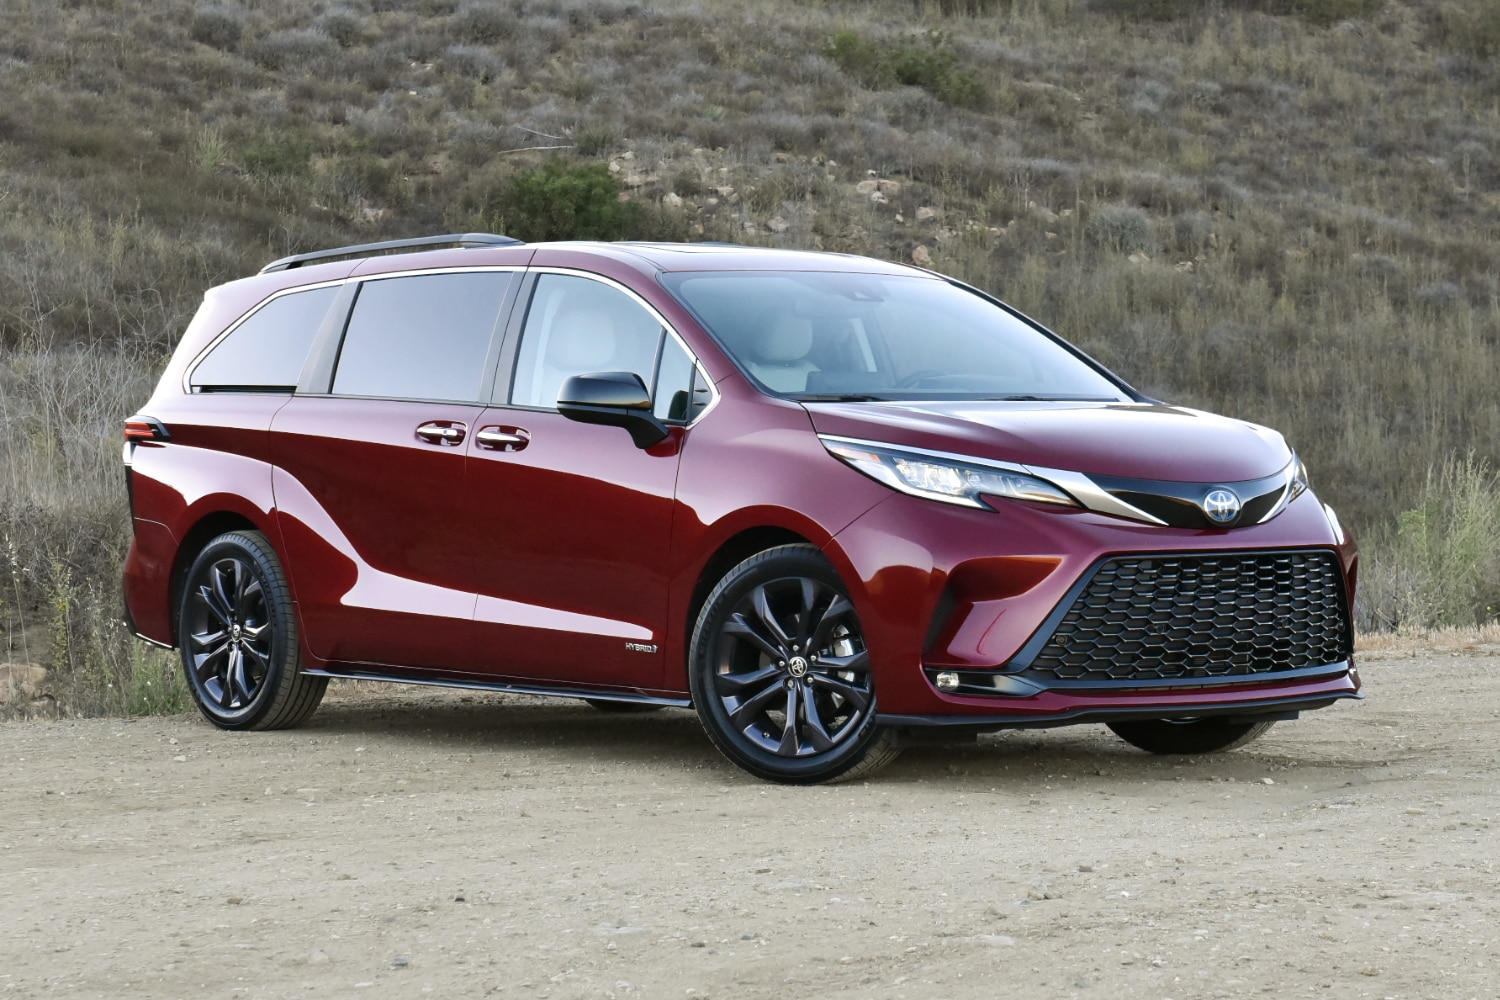 2021 Toyota Sienna: What's It Like to Live With?